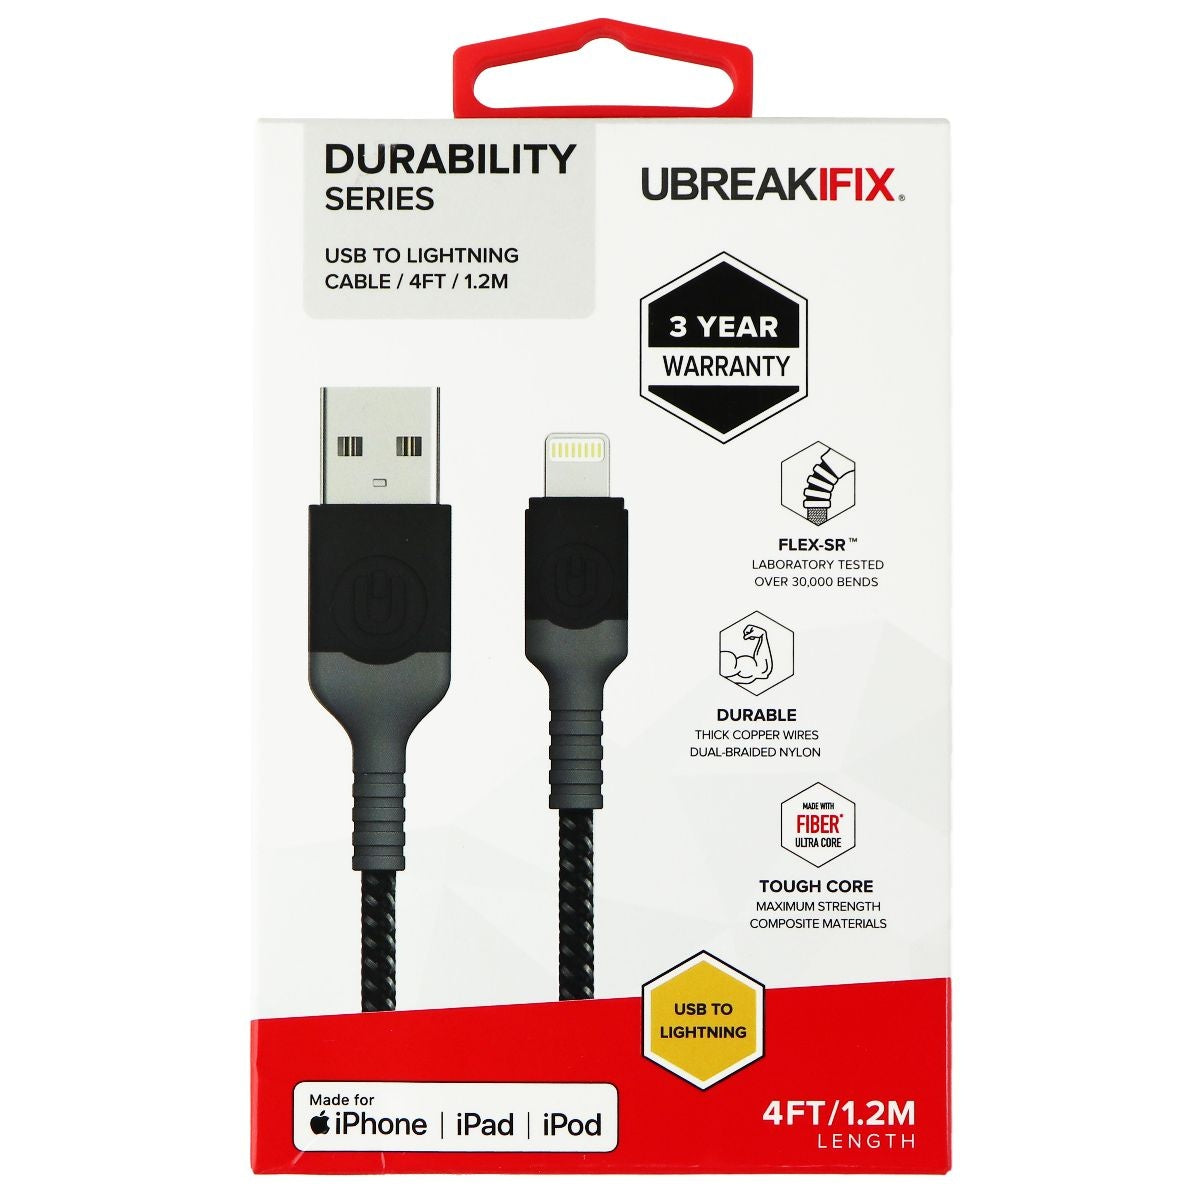 UBREAKIFIX (4-Ft) Durability USB to 8-Pin MFi Cable for iPhone/iPad - Black